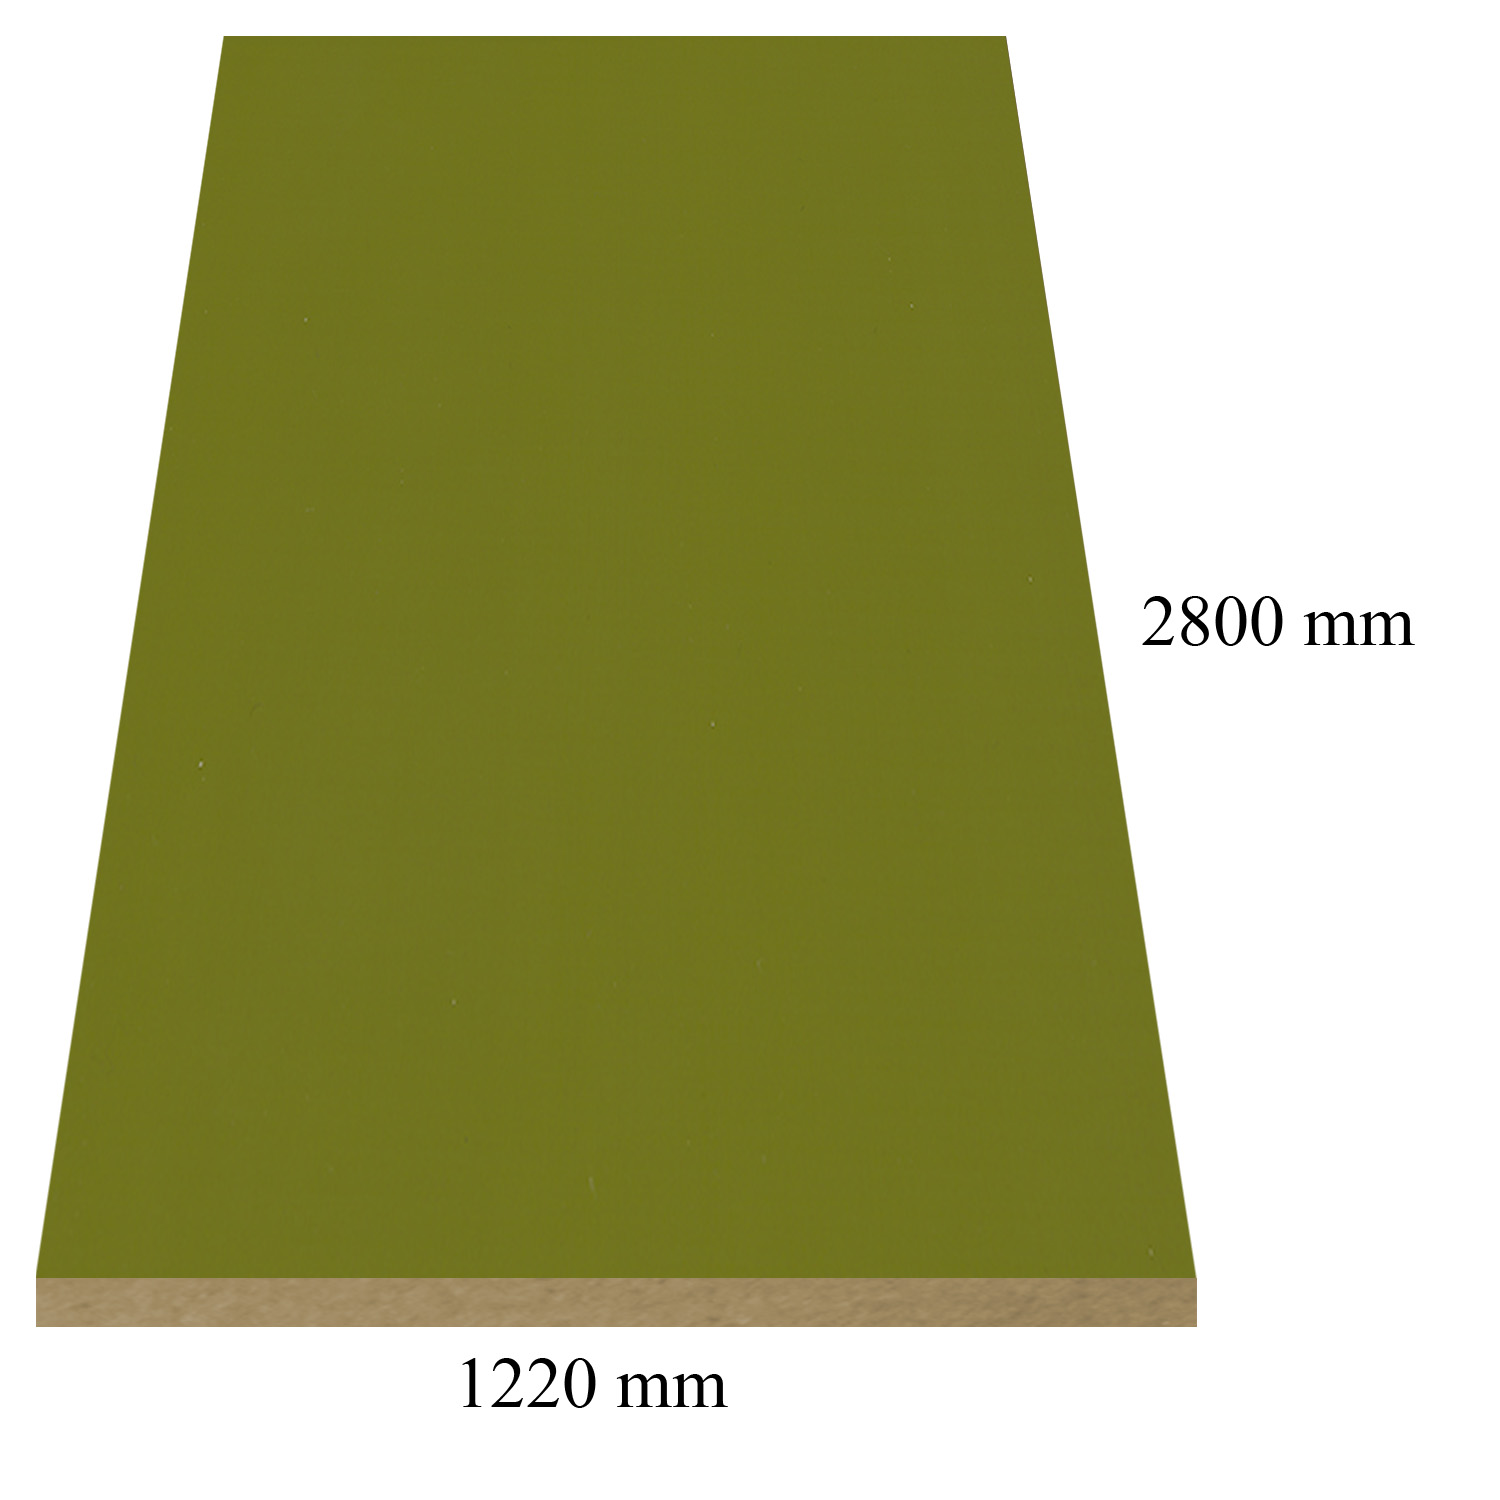 Y11 (667) Olive green high gloss - PVC coated 18 mm MDF - У11